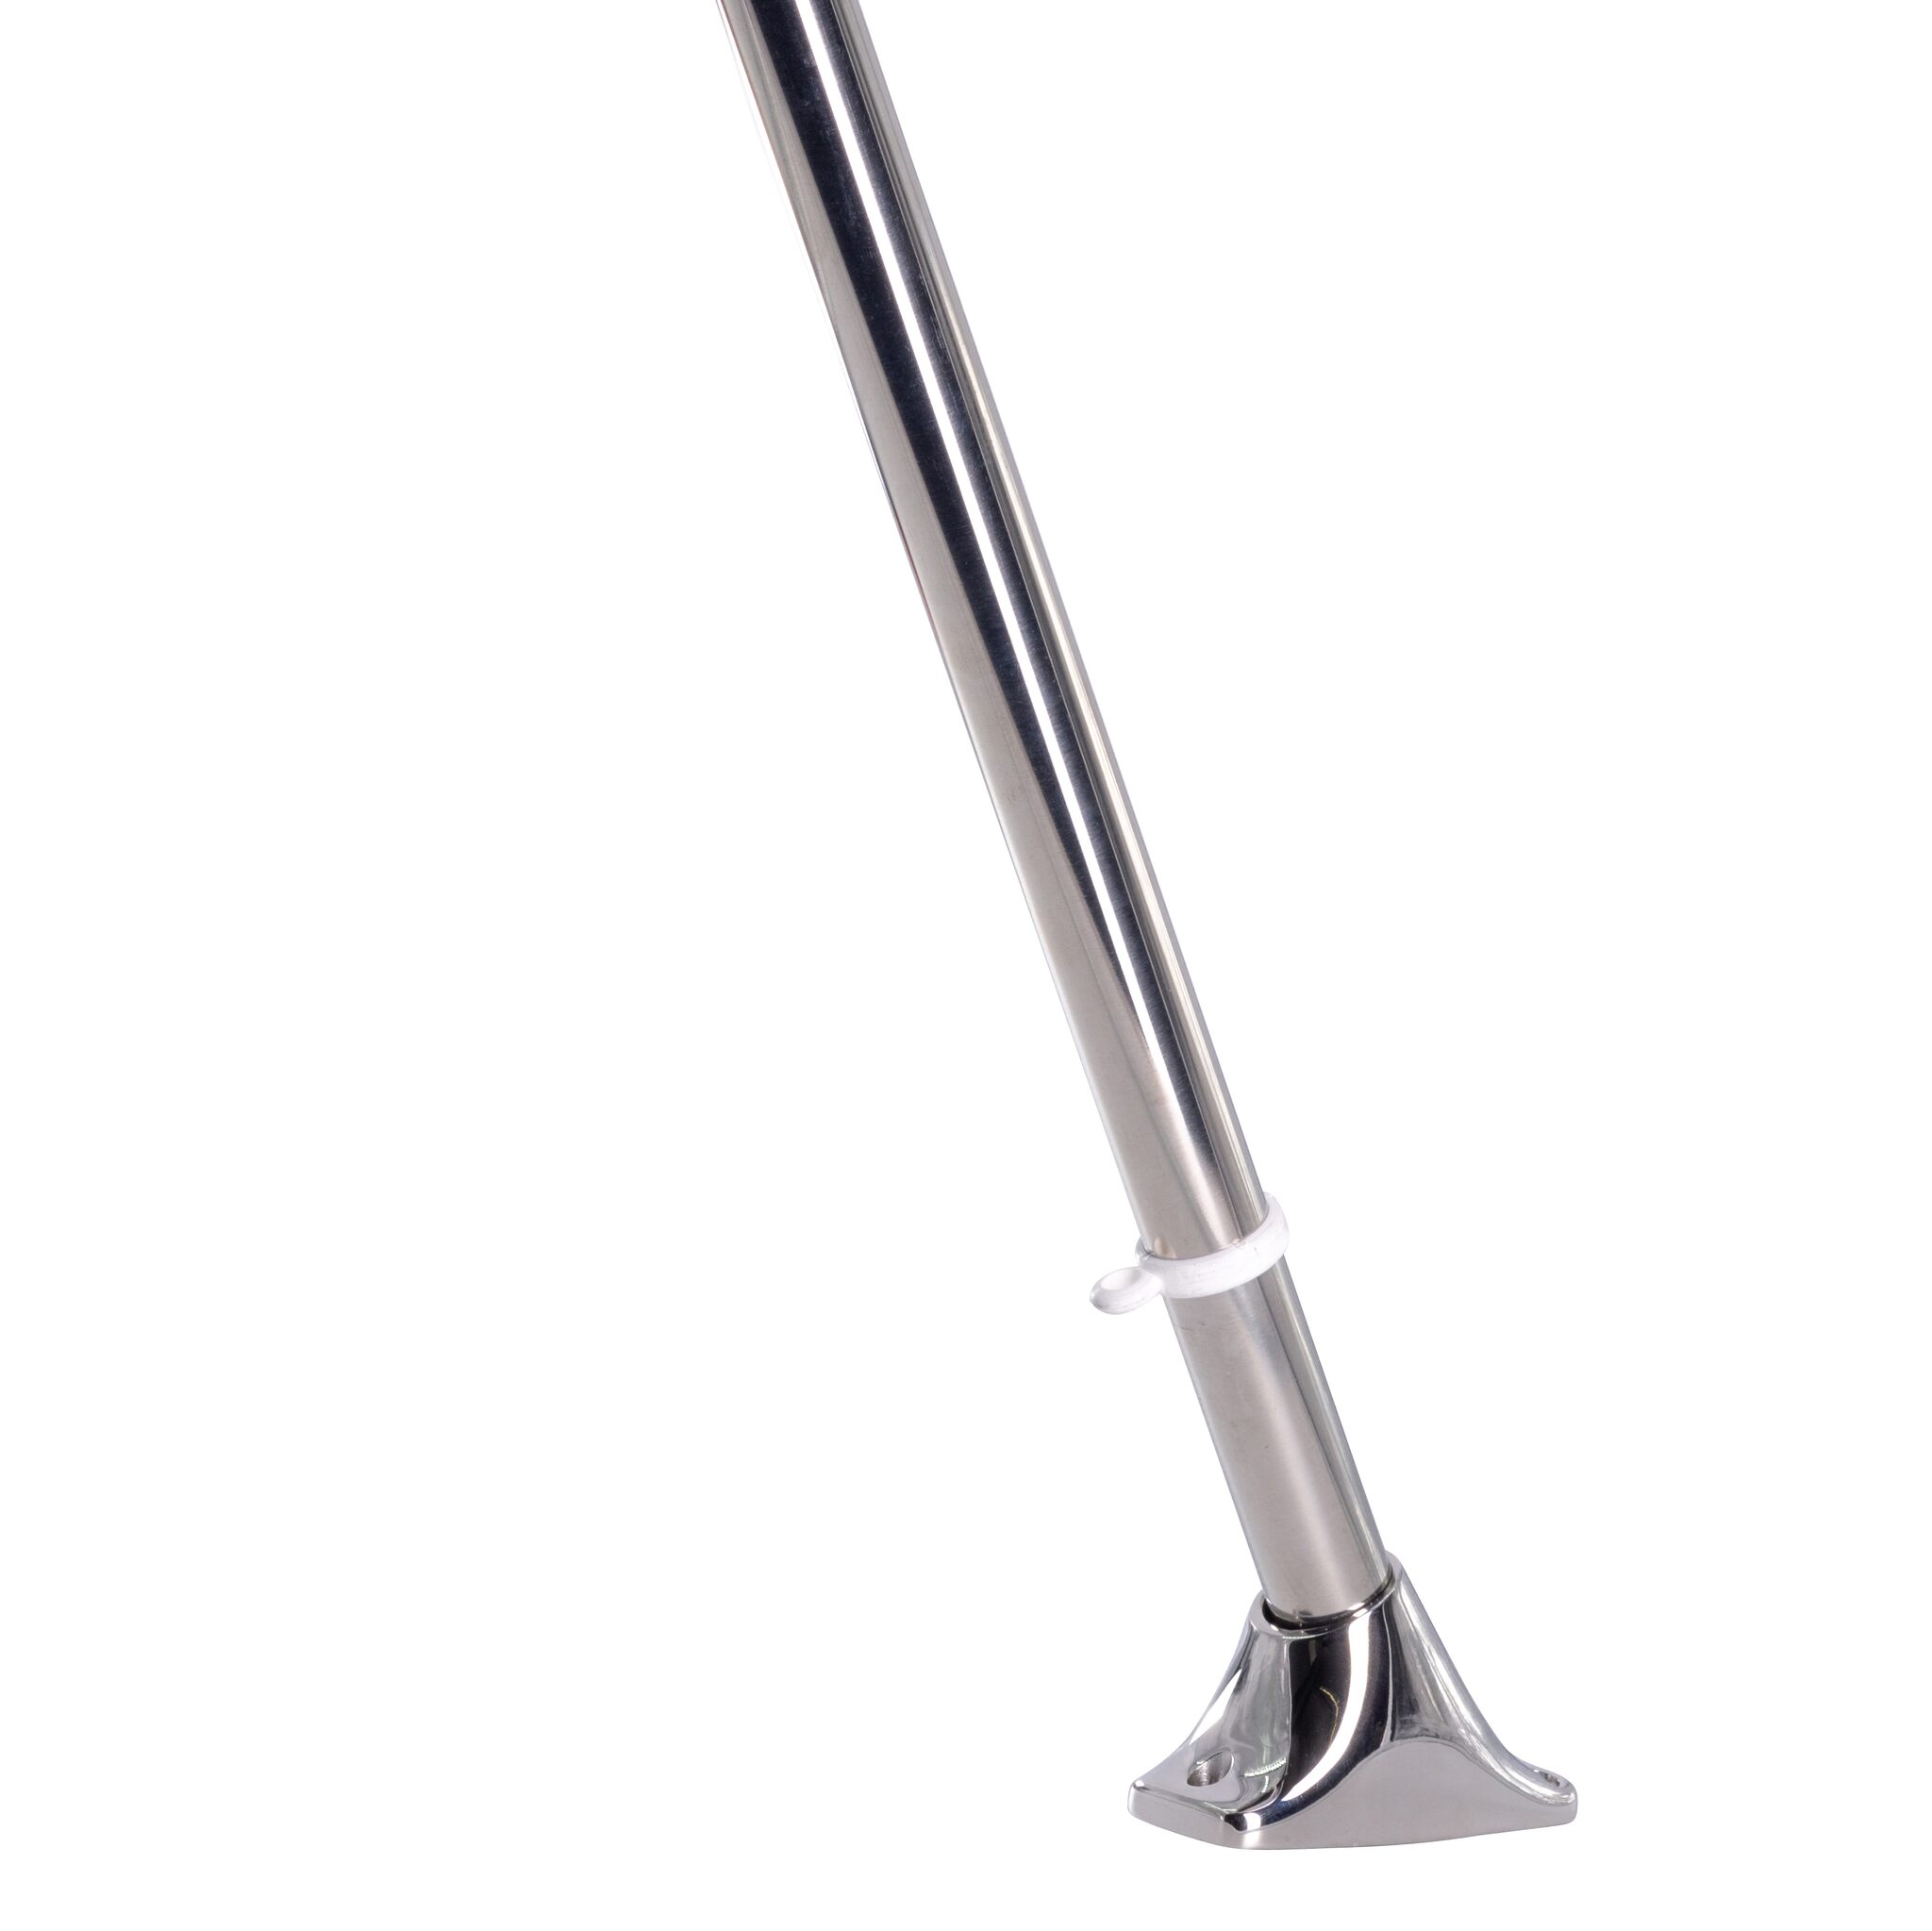 awn stainless steel flagpole with base